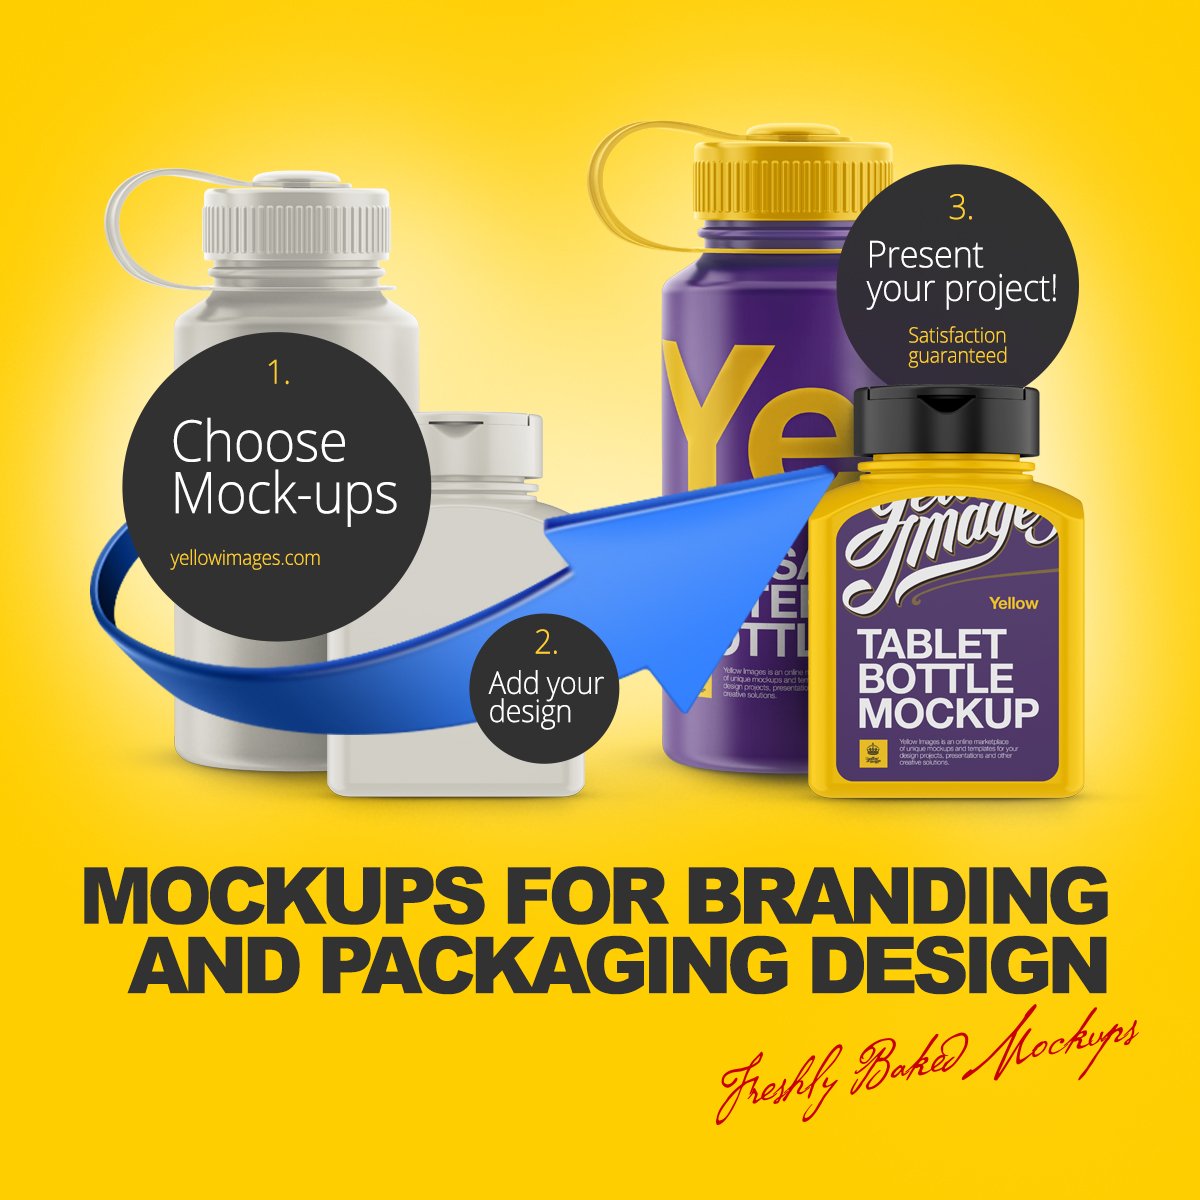 Download Yellow Images On Twitter Freshly Baked Mockups On Yellow Images Https T Co Fvtpxynwdl Yellowimages Mockups Packaging Branding Psd Yellowimages Mockups